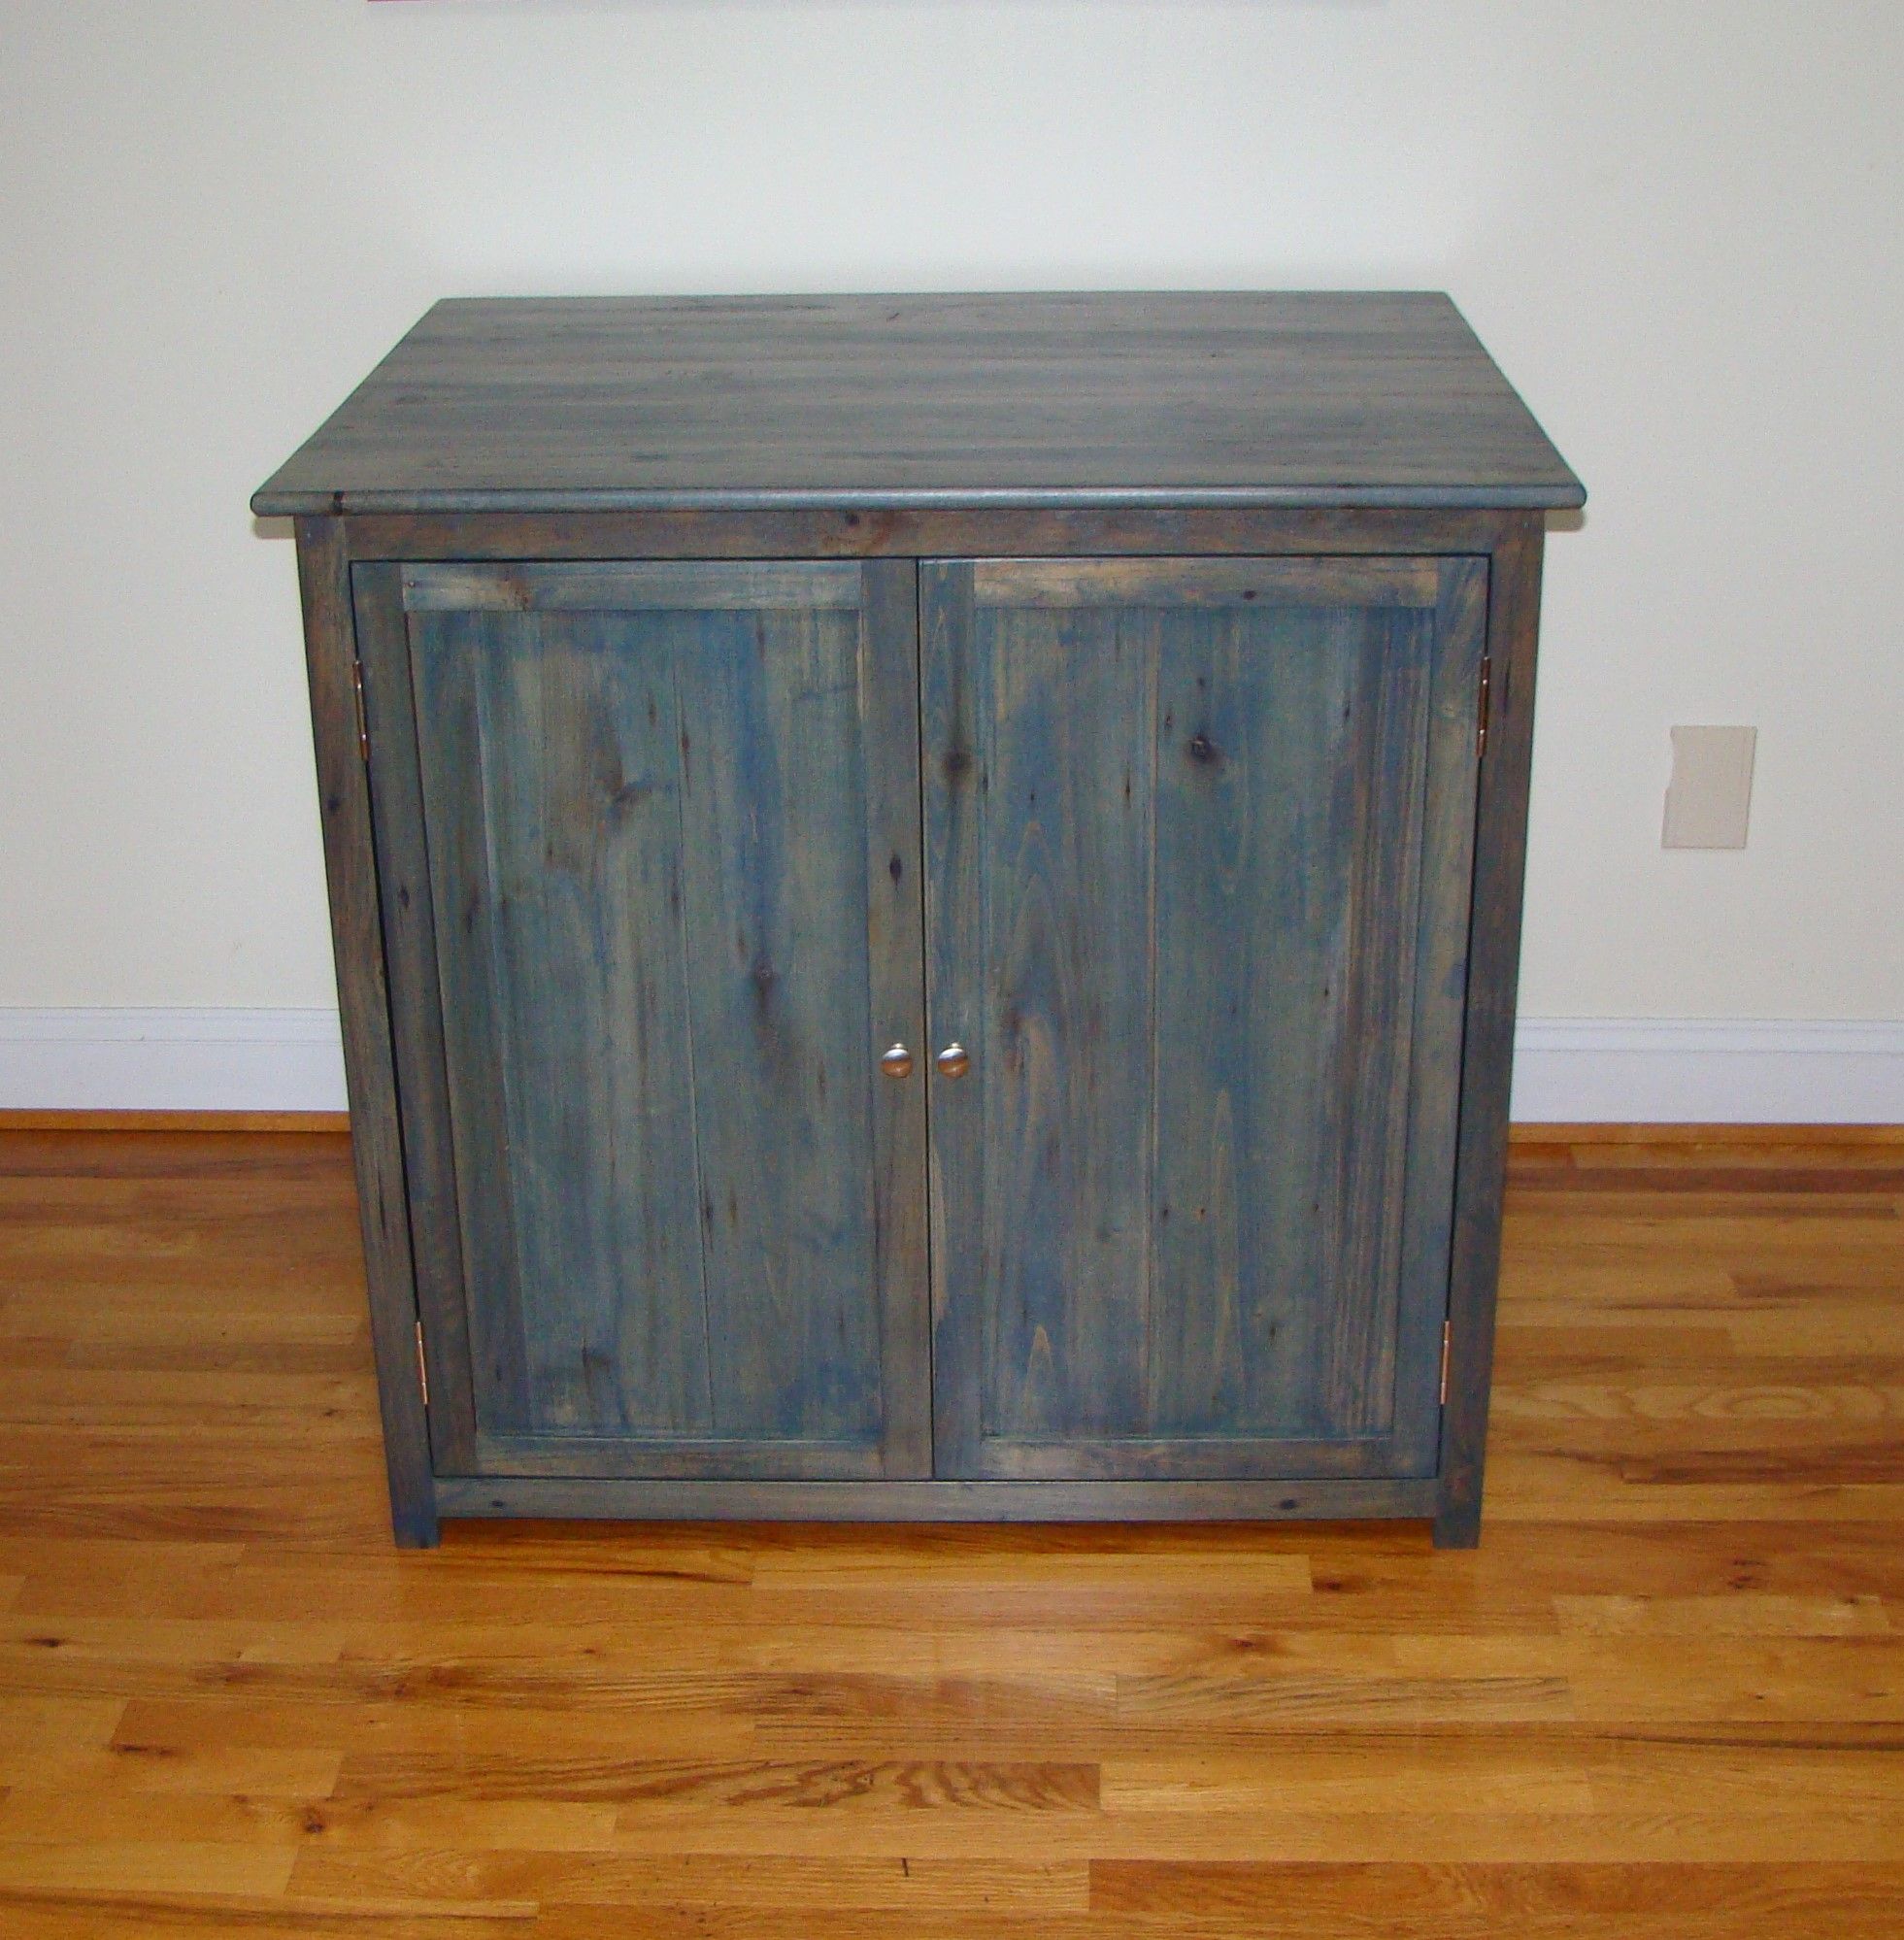 Buy Custom Litter Robot Concealing Cabinet Made To Order From Flying Pigs Furniture Llc Custommade Com